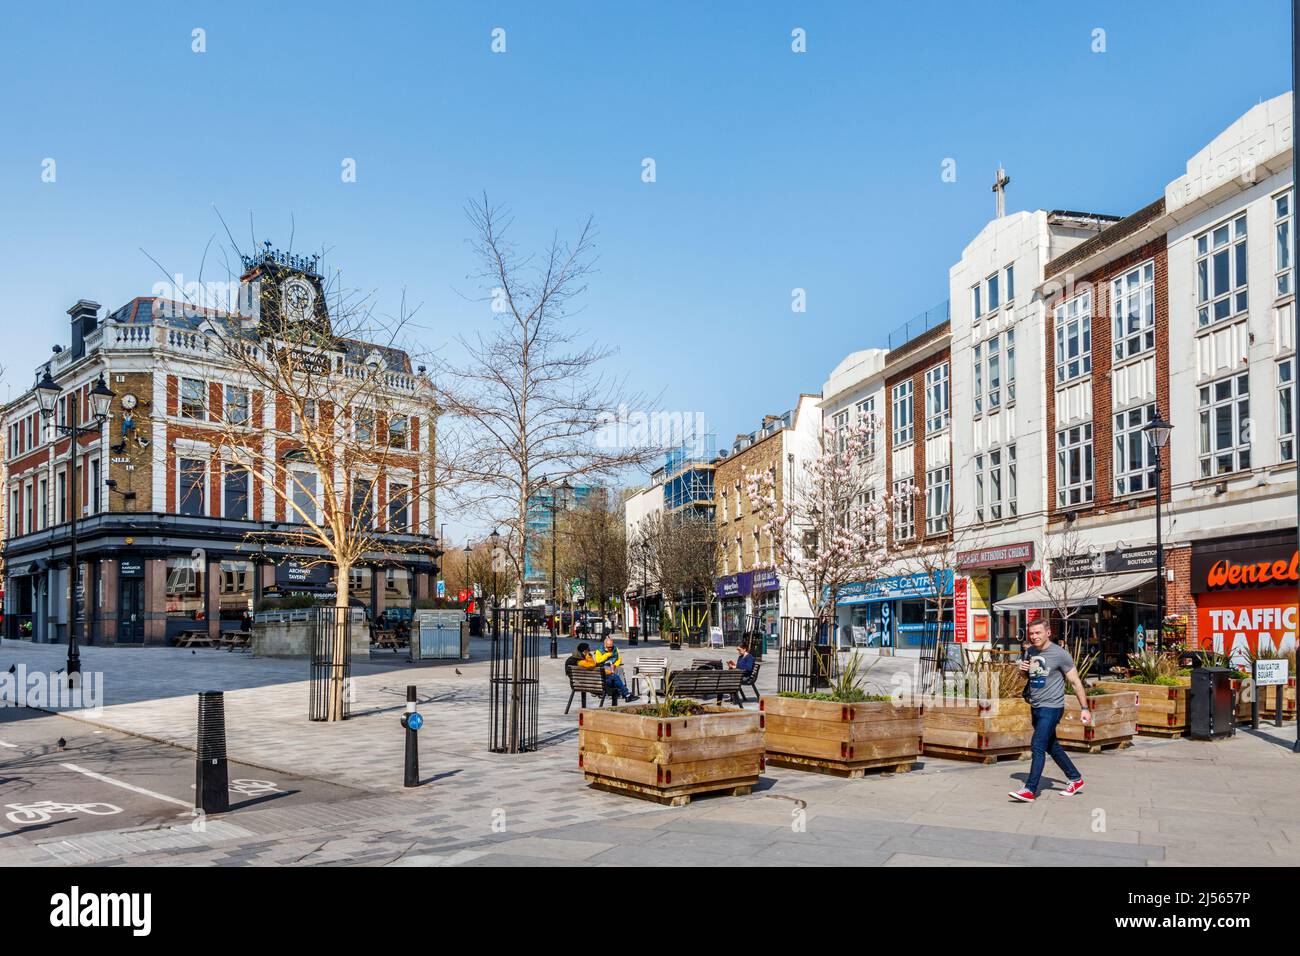 The Archway Tavern and Methodist Church in Navigator Square, a pedestrianised public area in Archway town centre in North Islington, London, UK Stock Photo